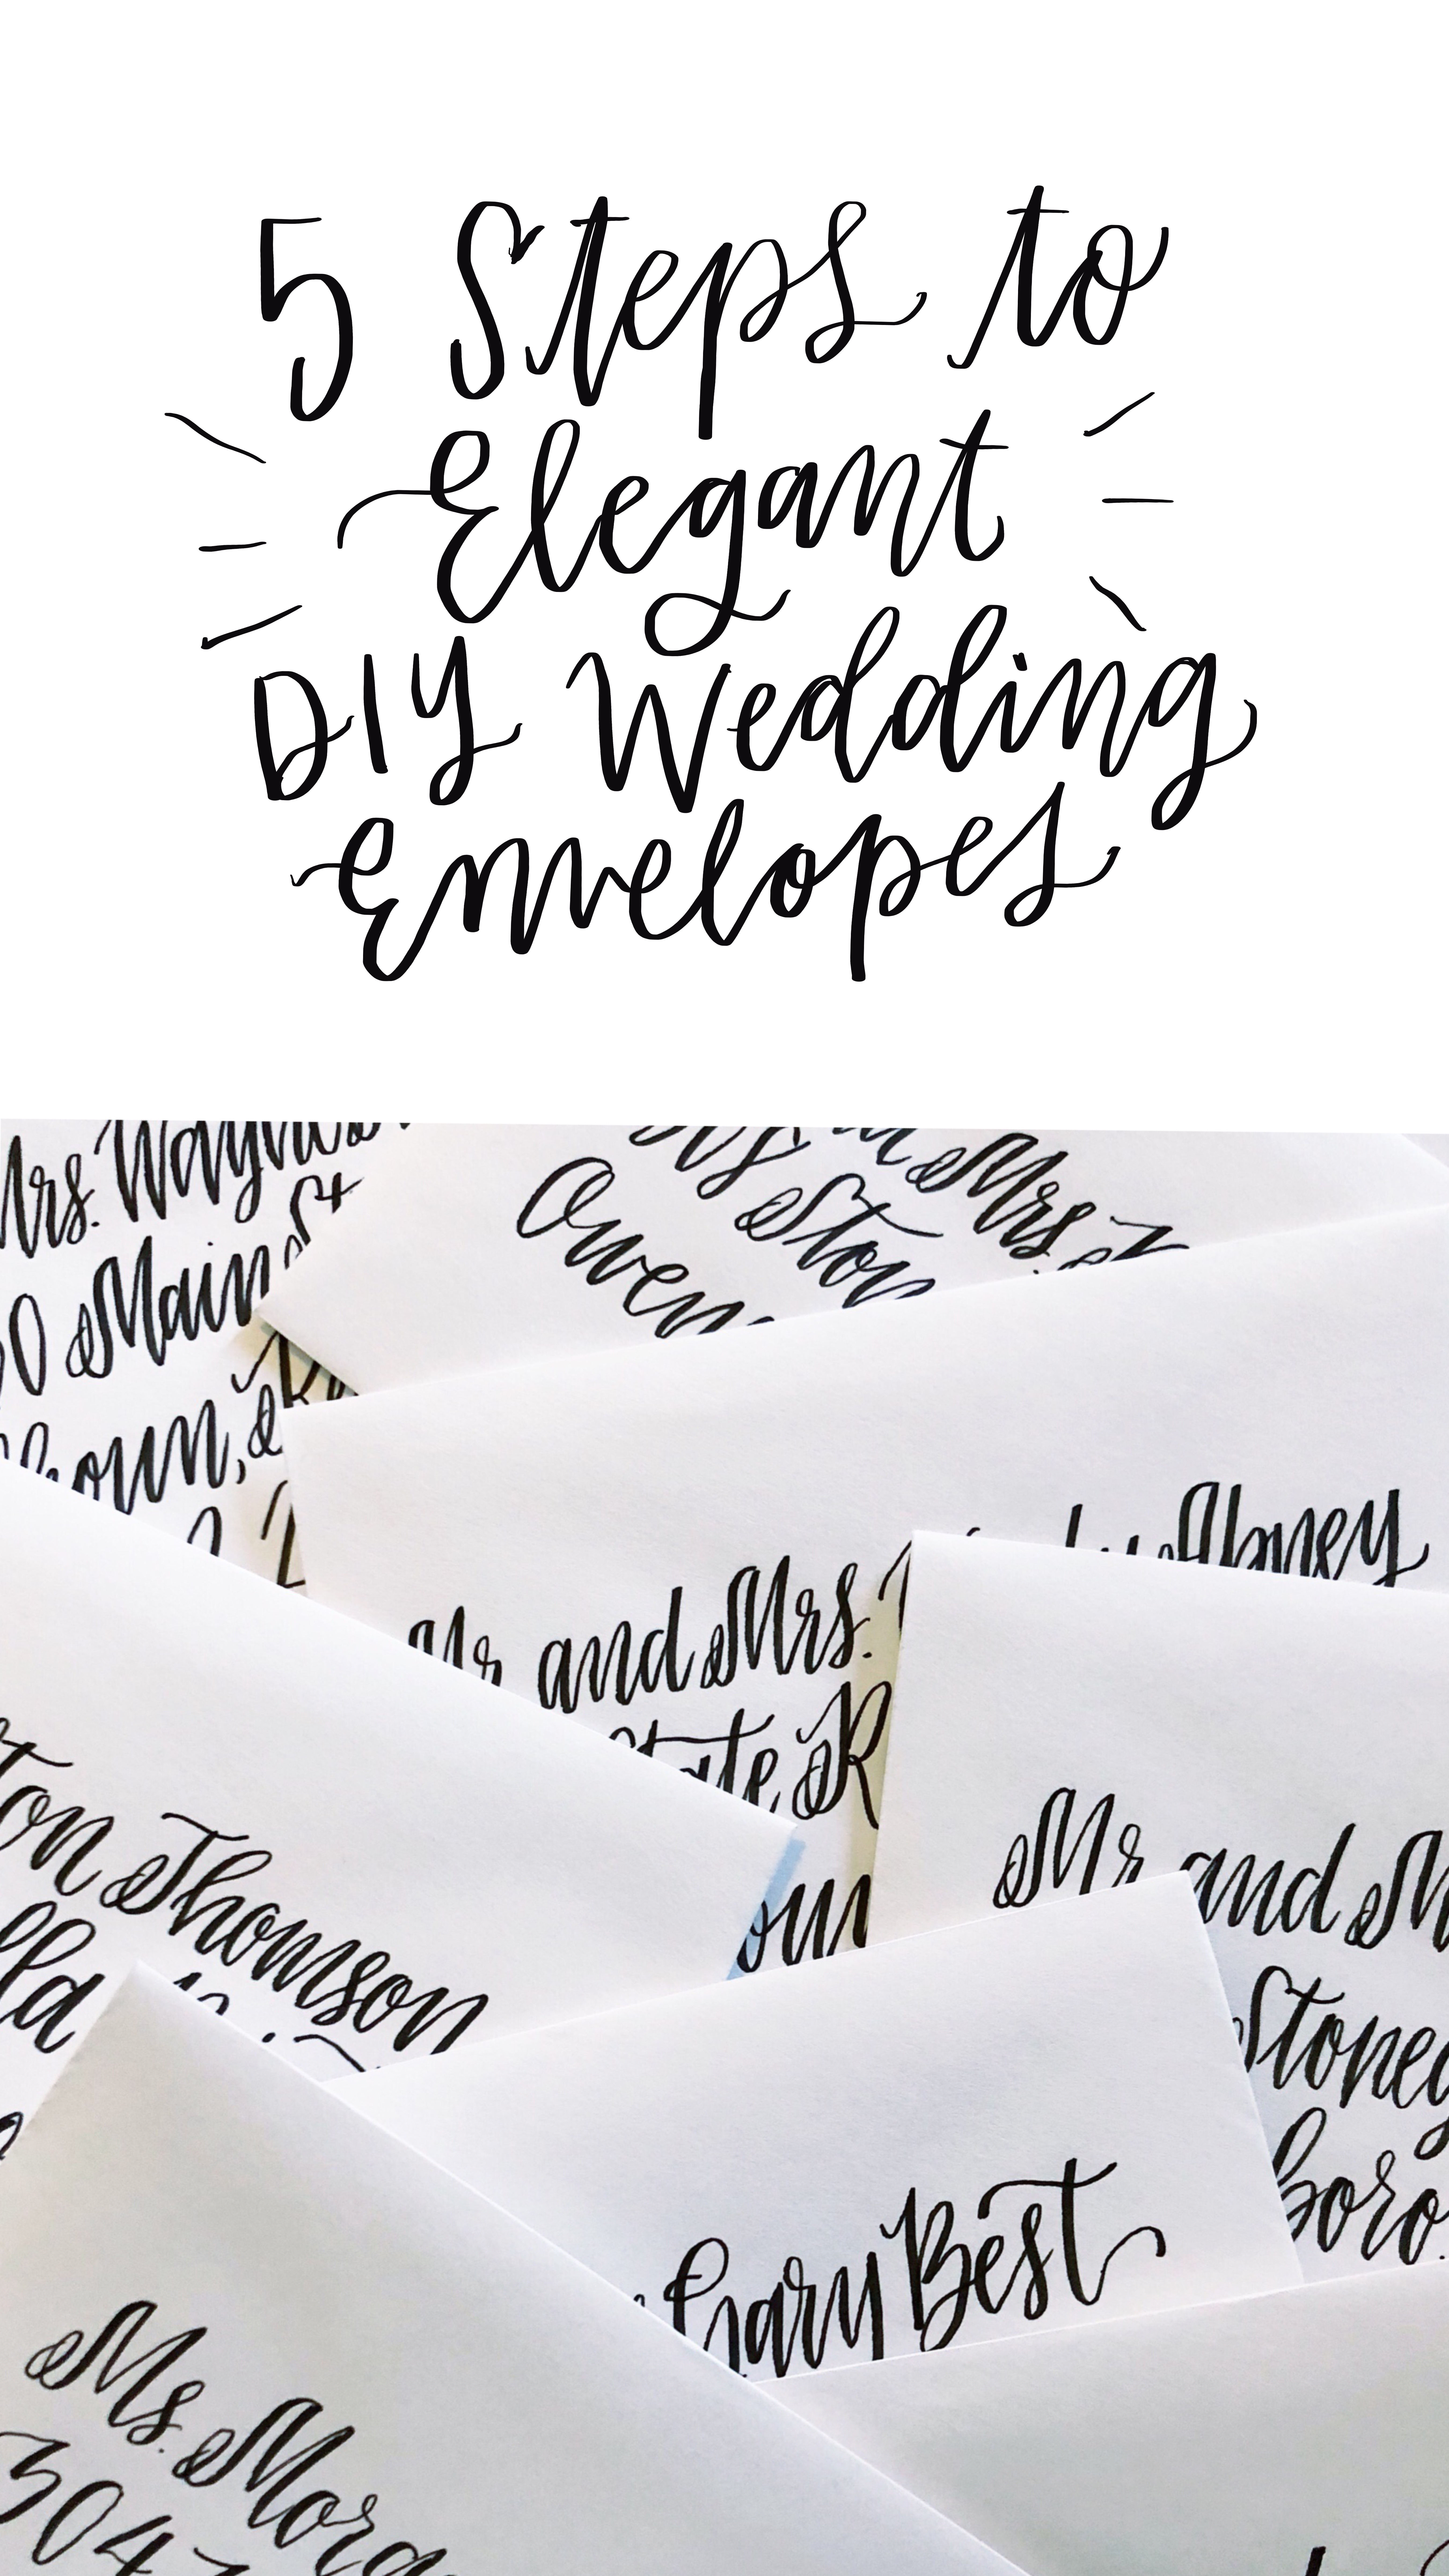 Lauren Fitzmaurice of @renmadecalligraphy takes you step by step through creating elegant wedding envelopes using brush calligraphy and lettering supplies from TombowUSA.com.